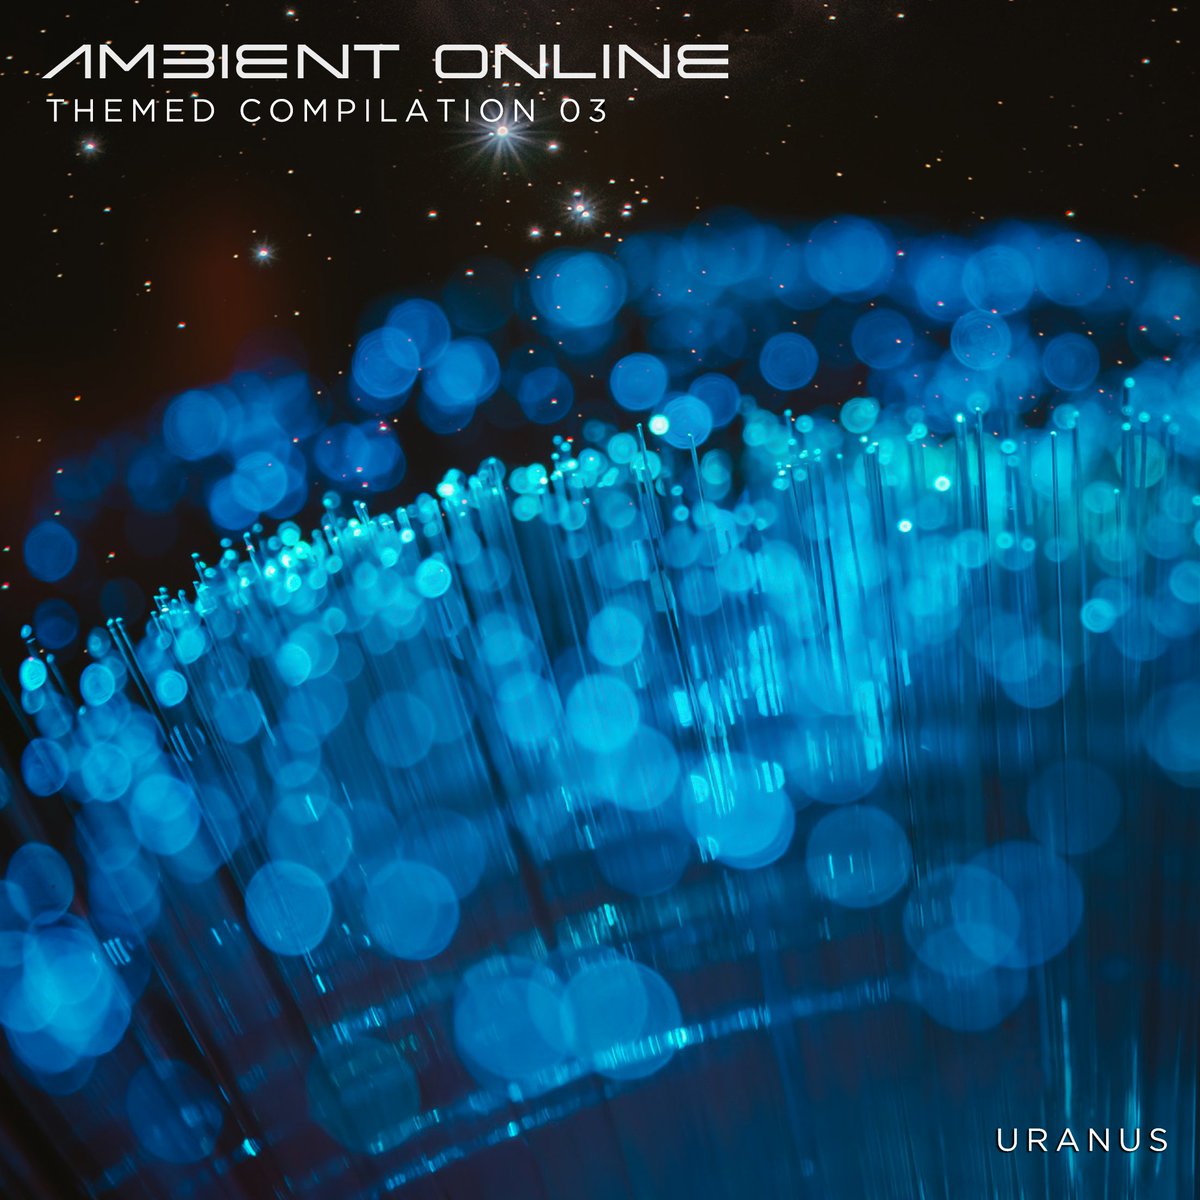 Ambient Online Themed Compilation 03: 'Uranus' is now available for pre-order! 74 tracks and almost 9 hours of high quality ambient music from the Ambient Online Community. #ambient #ambientonline ambientonline.bandcamp.com/album/ambient-…